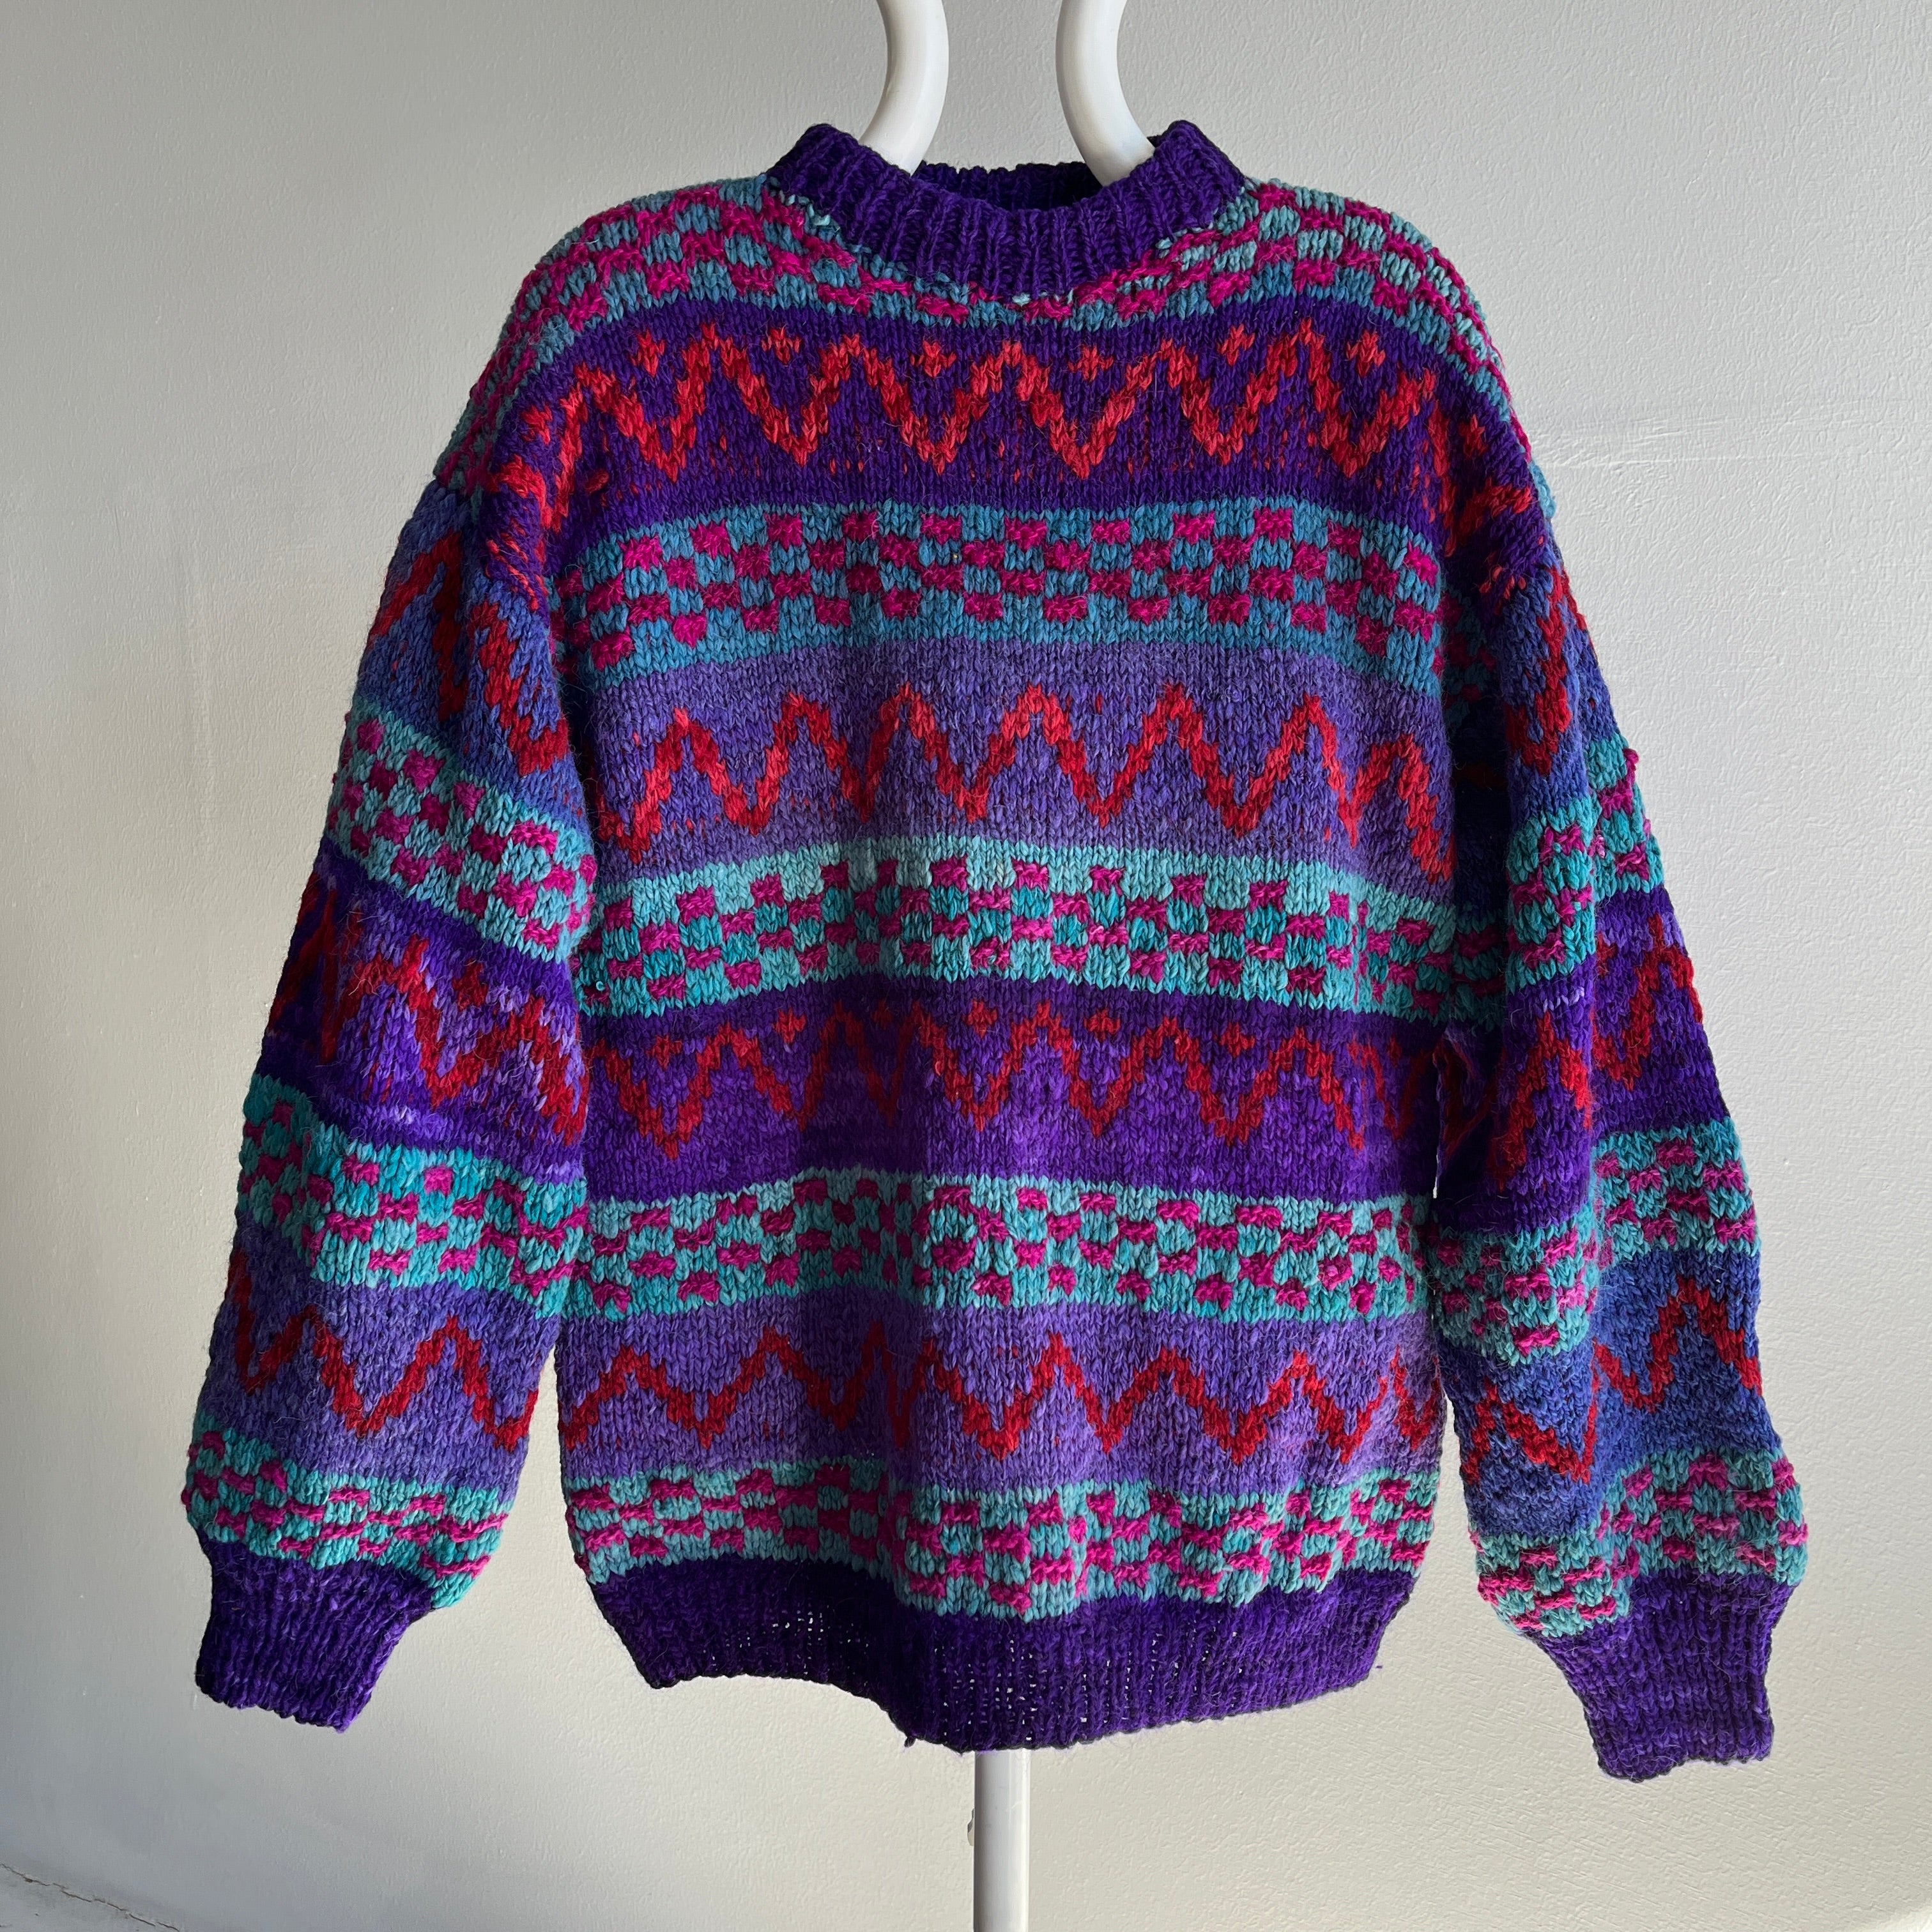 1980s Hand Knit Medium Chunky Knit Sweater - Yes!